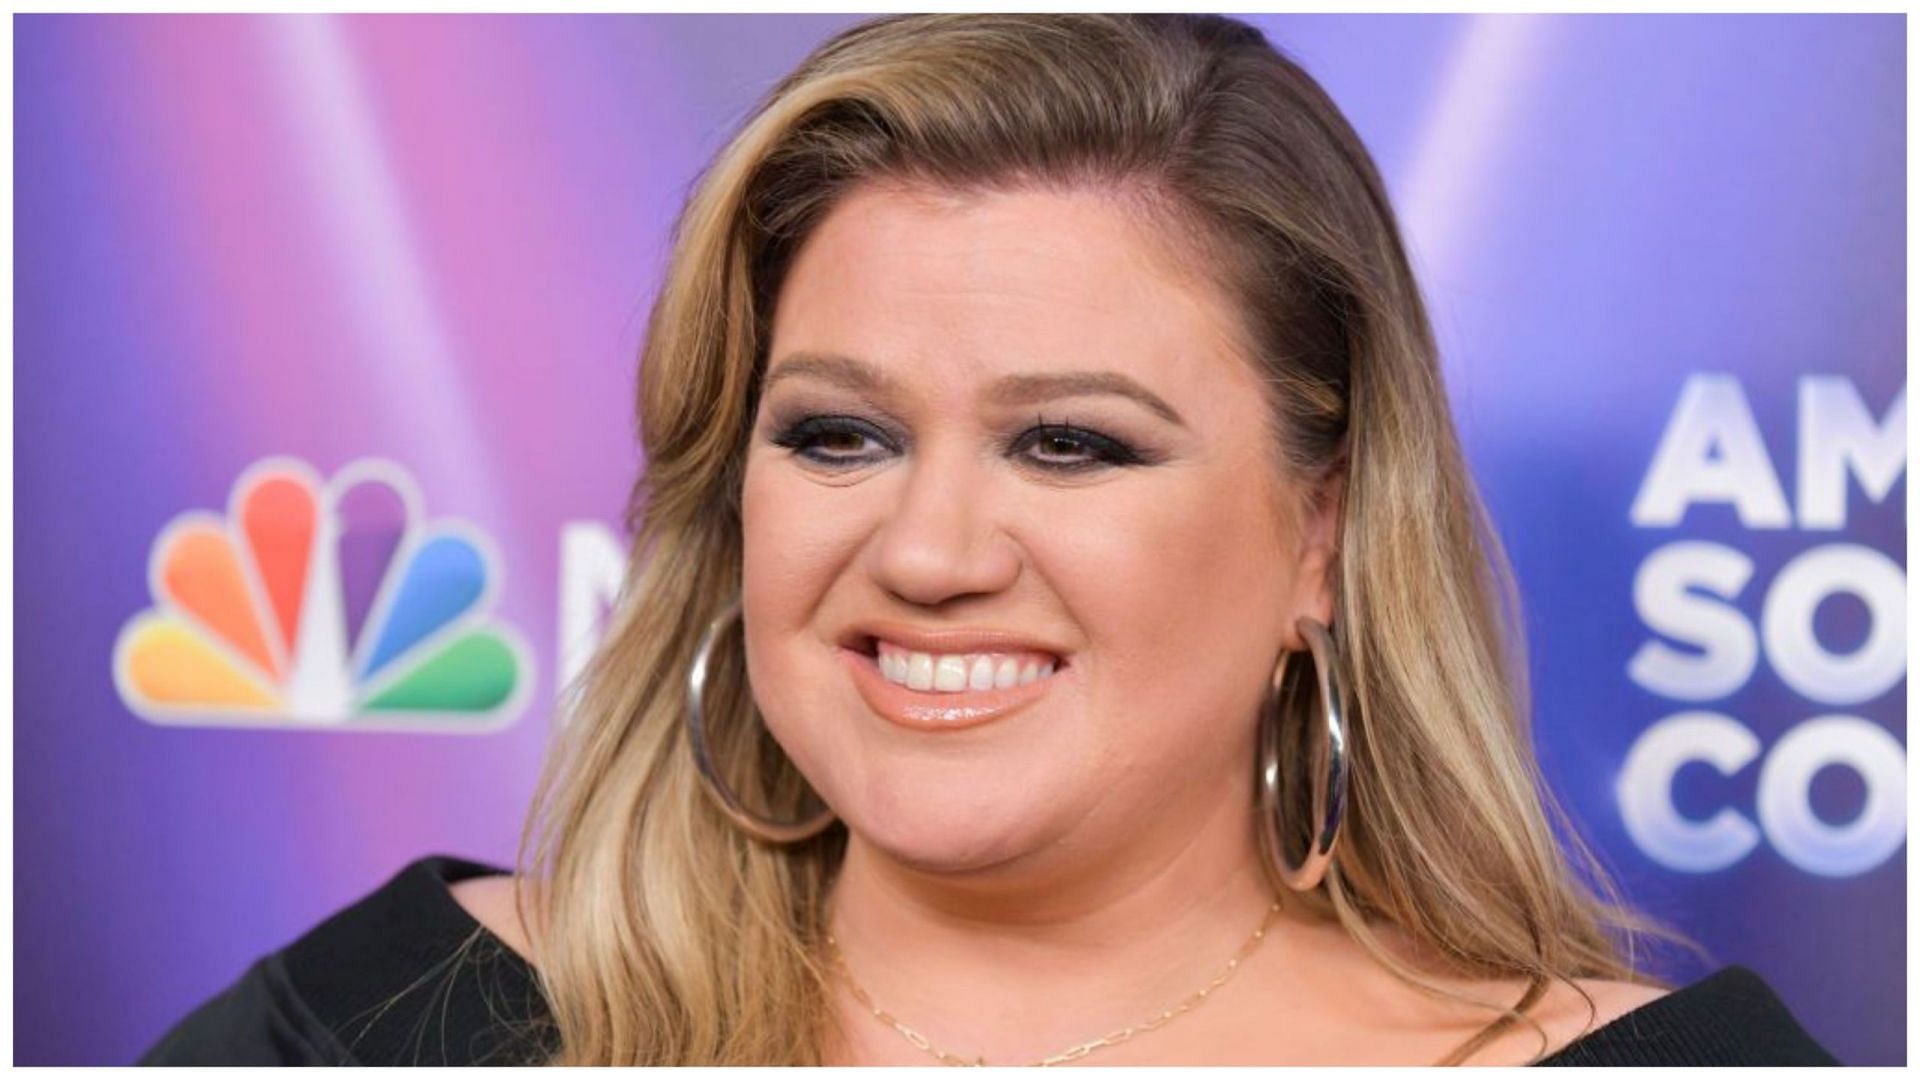 Consistent diet and exercise was the key (Image via Instagram @kellyclarkson)